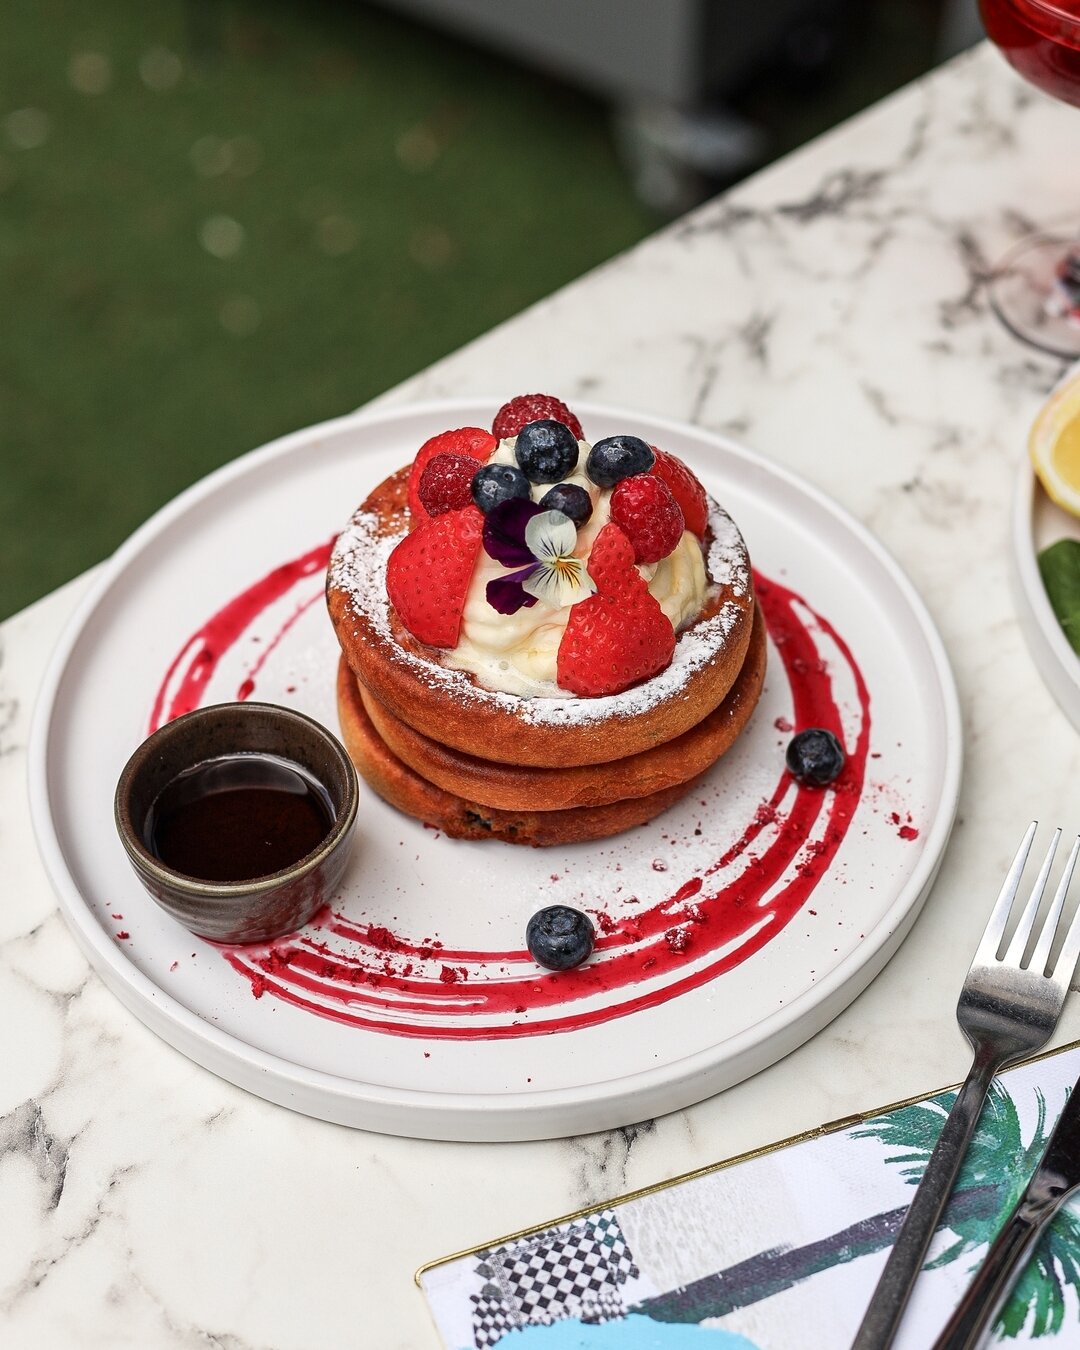 Kickstart your Monday with a stack of fluffy Blueberry Buttermilk Pancakes at Daisy! 🍯🍓🫐​​​​​​​​ 

We&rsquo;ve worked incredibly hard to recreate what we think encapsulates the perfect blueberry pancakes. Our mix uses buttermilk for extra height a